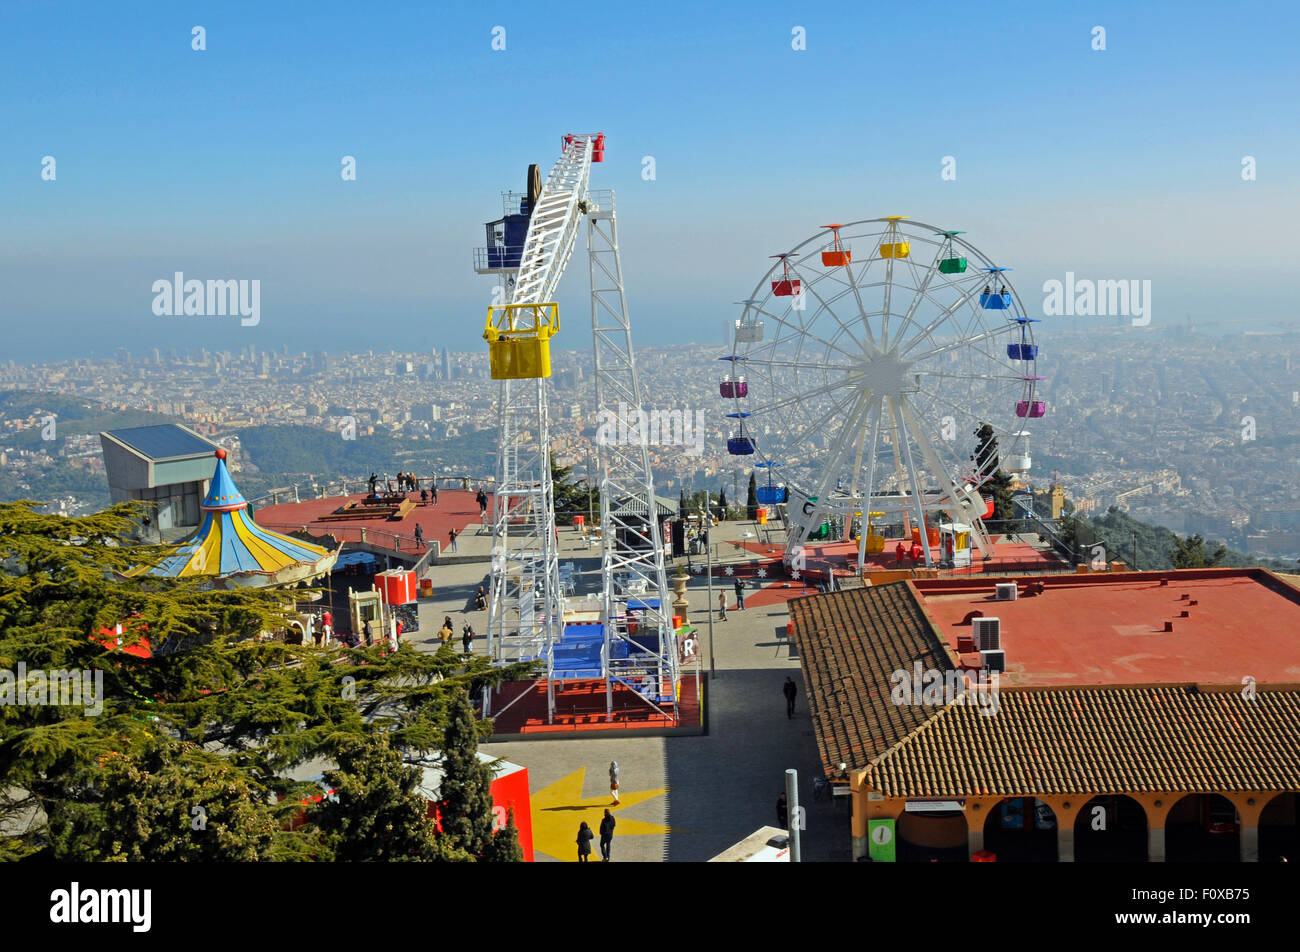 Vintage amusement park at the top of Tibidabo mountain in Barcelona, Spain Stock Photo